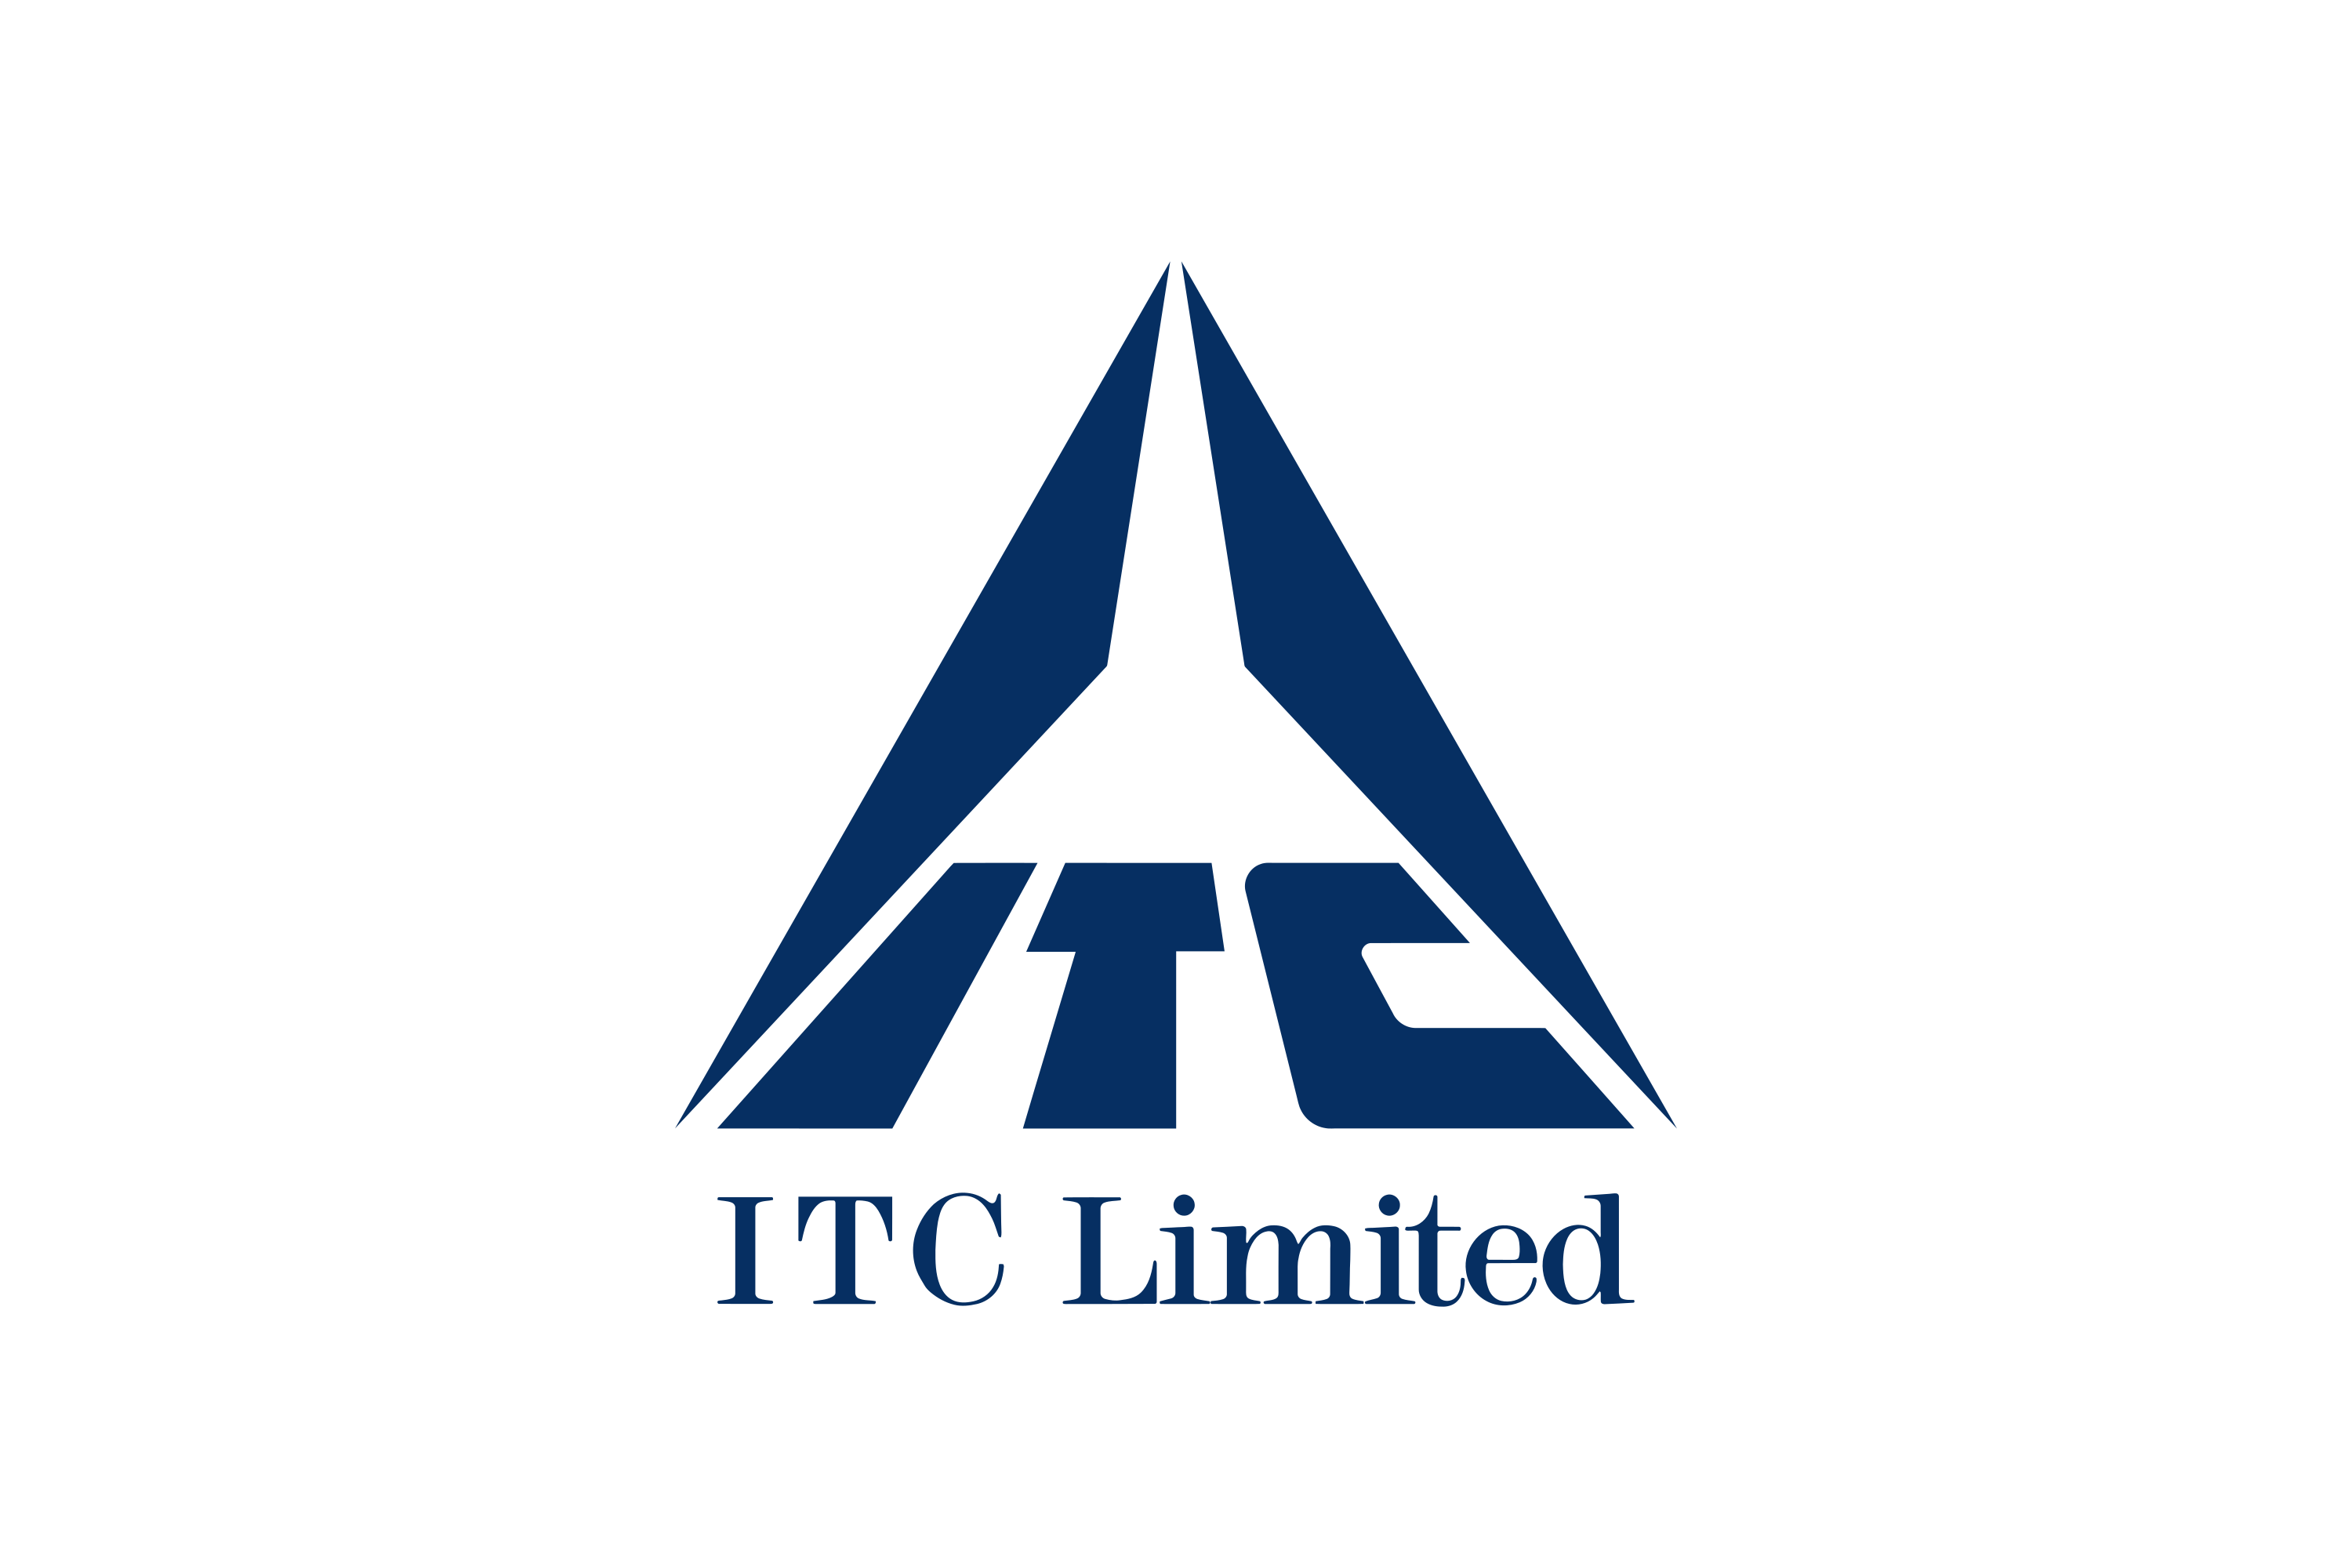 ITC Limited Logo PNG